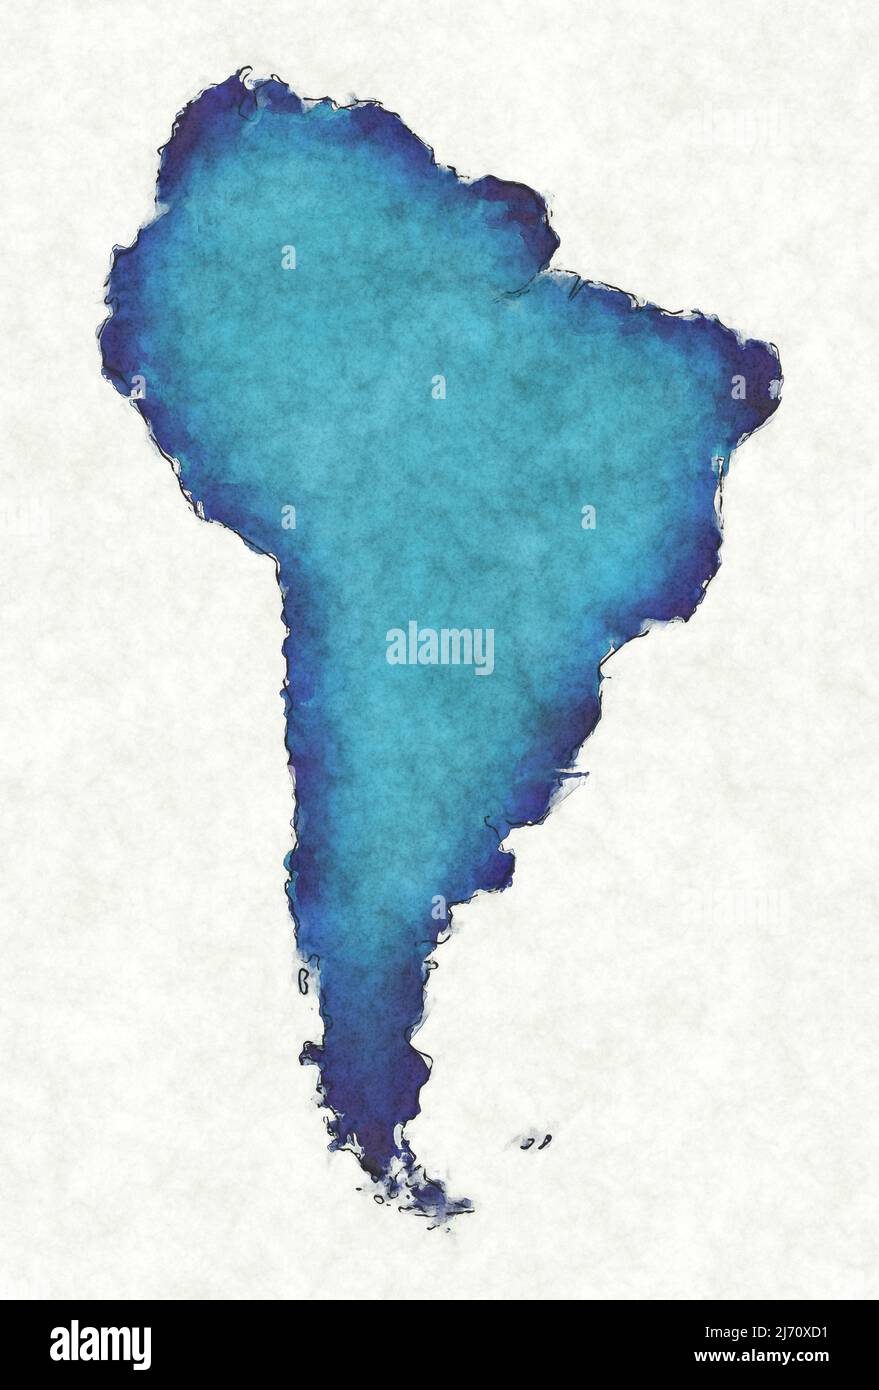 South America map with drawn lines and blue watercolor illustration Stock Photo